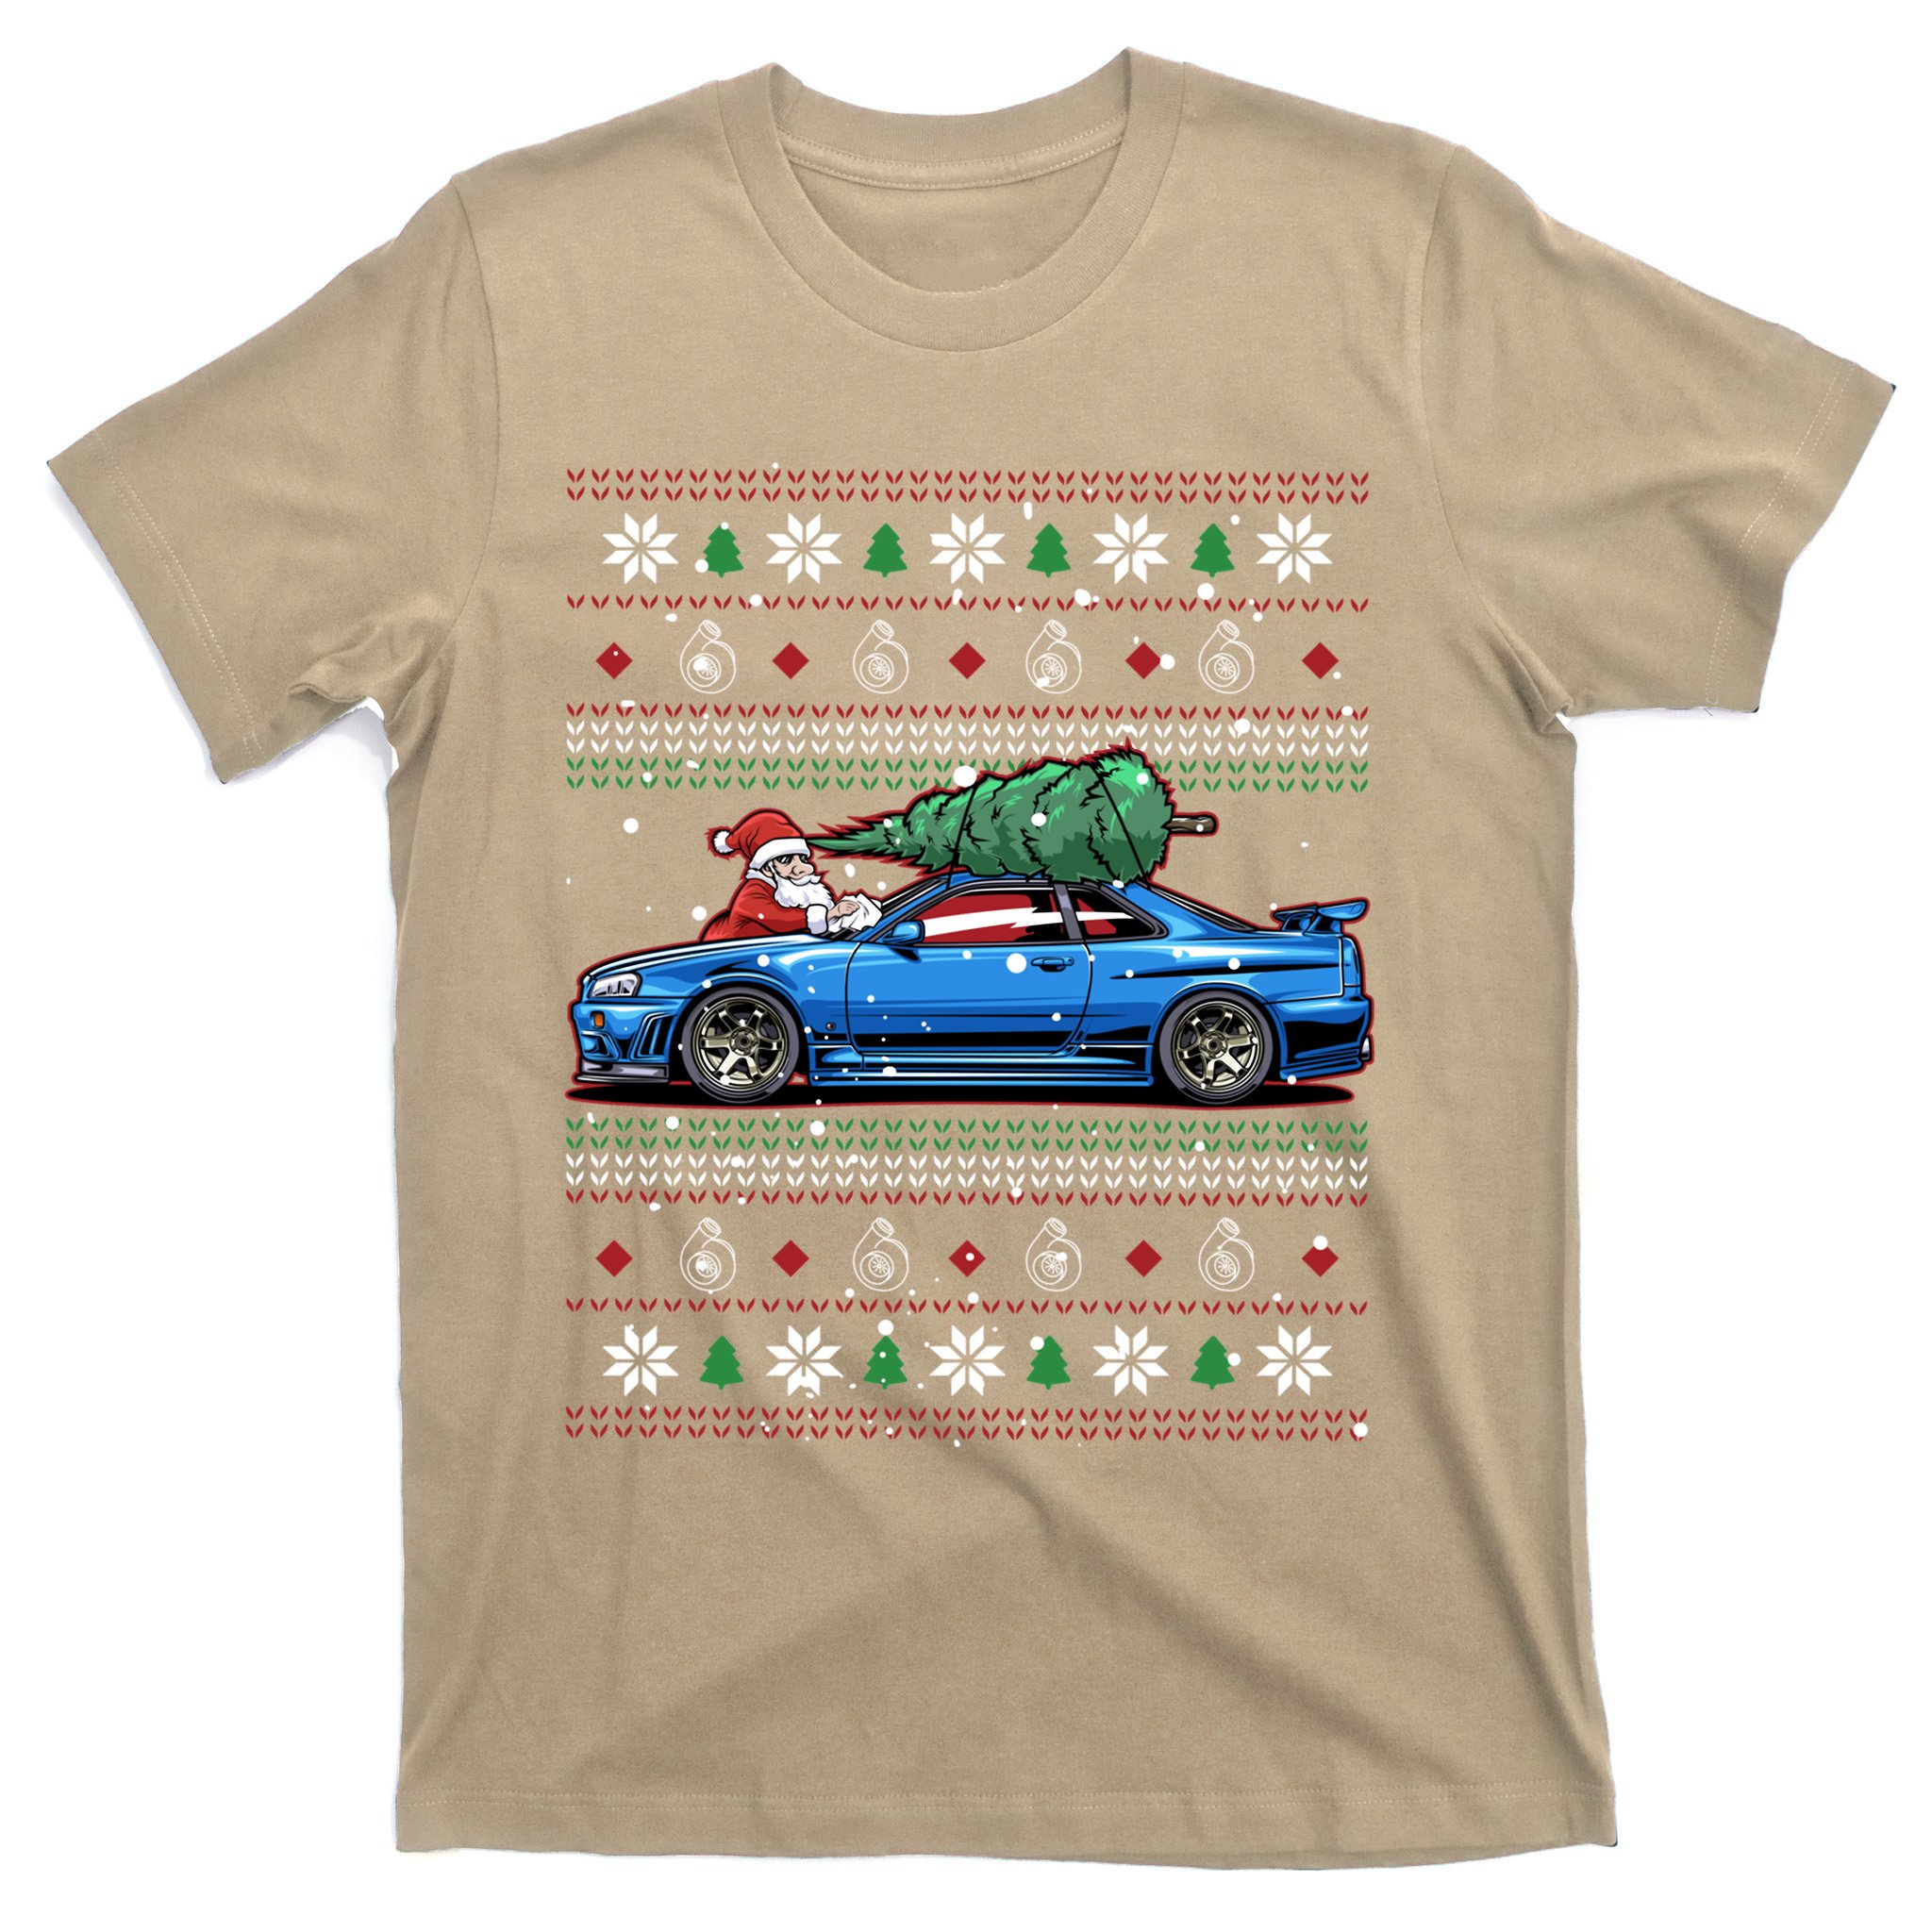 https://images3.teeshirtpalace.com/images/productImages/cun7967966-christmas-ugly-nissan-skyline-r34-best-car-guy-gift-classic--sand-at-garment.jpg